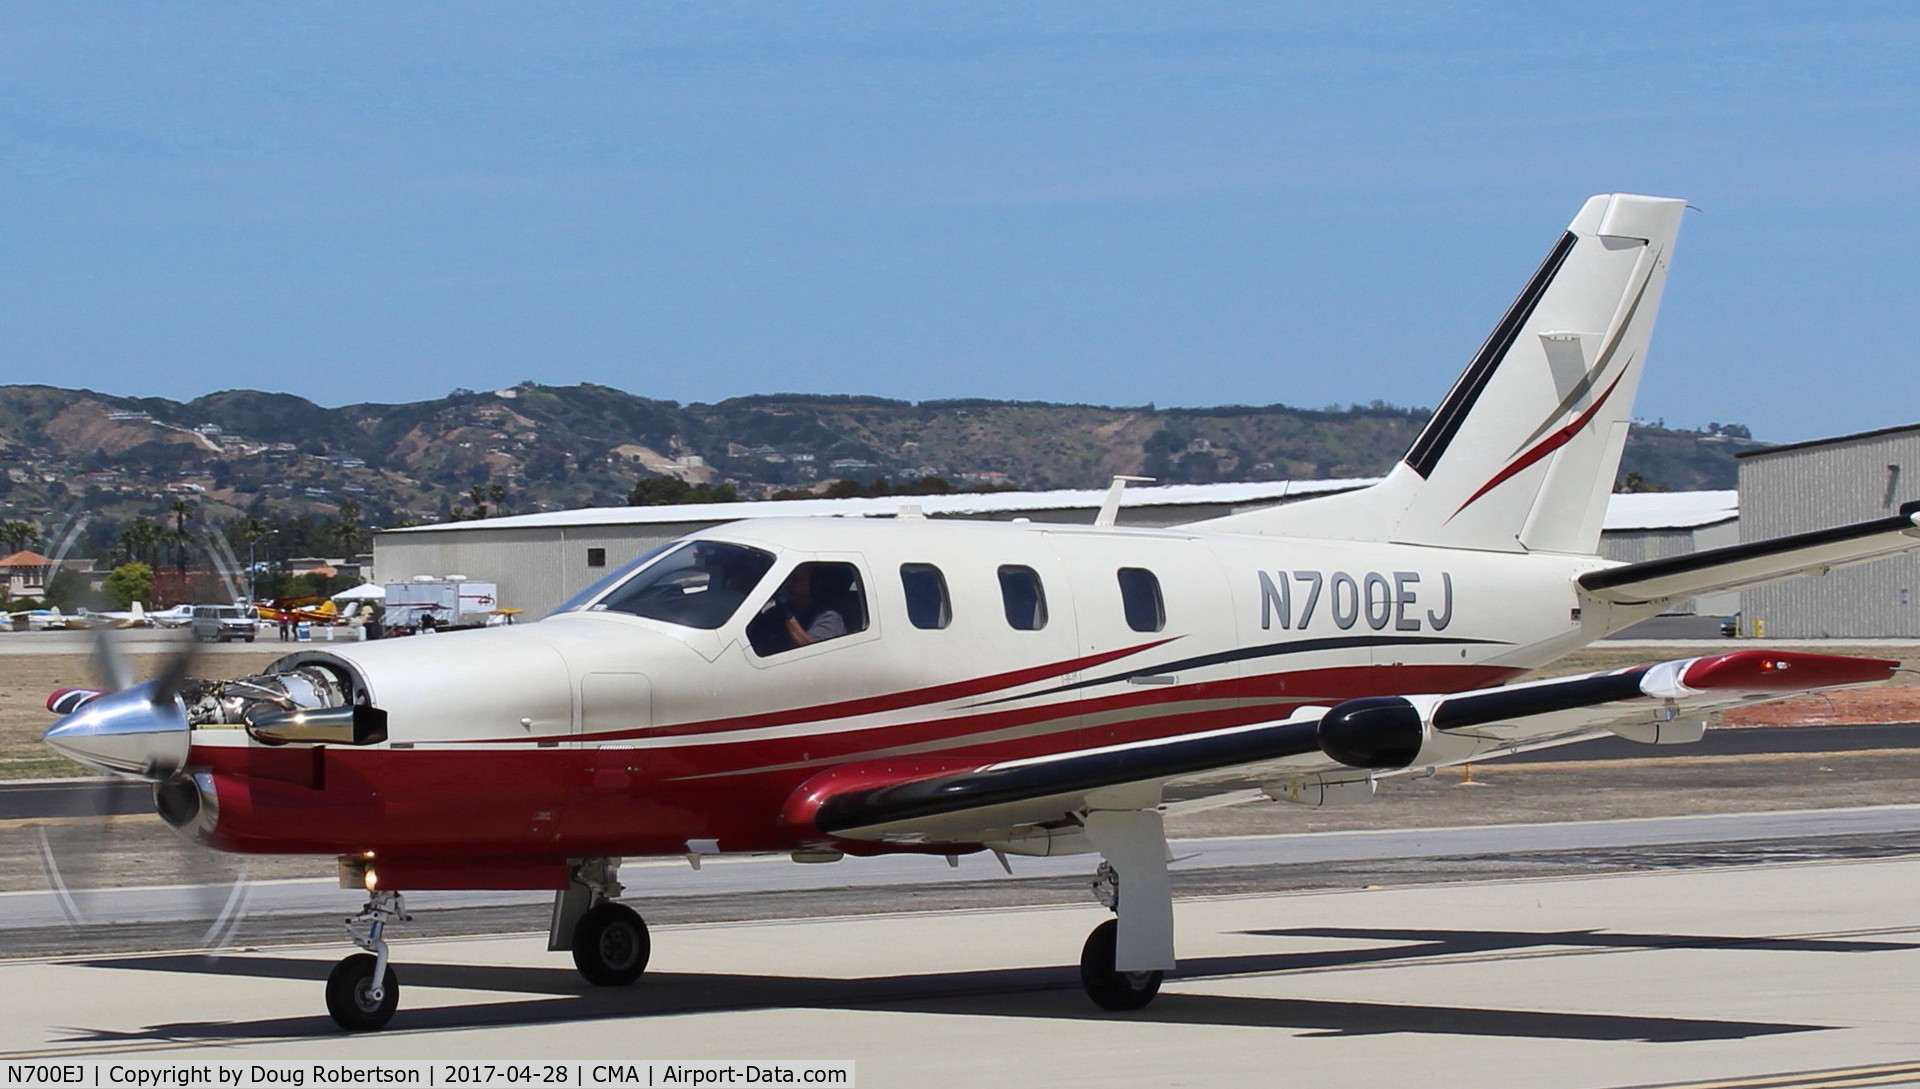 N700EJ, 2004 Socata TBM-700 C/N 291, 2004 Socata TBM-700, one P&W(C)PT6A-64 turboprop, 1,580 sHp flat rated to 700 sHp, taxi with cowl partly off. See far earlier photo for a cowl on shot.